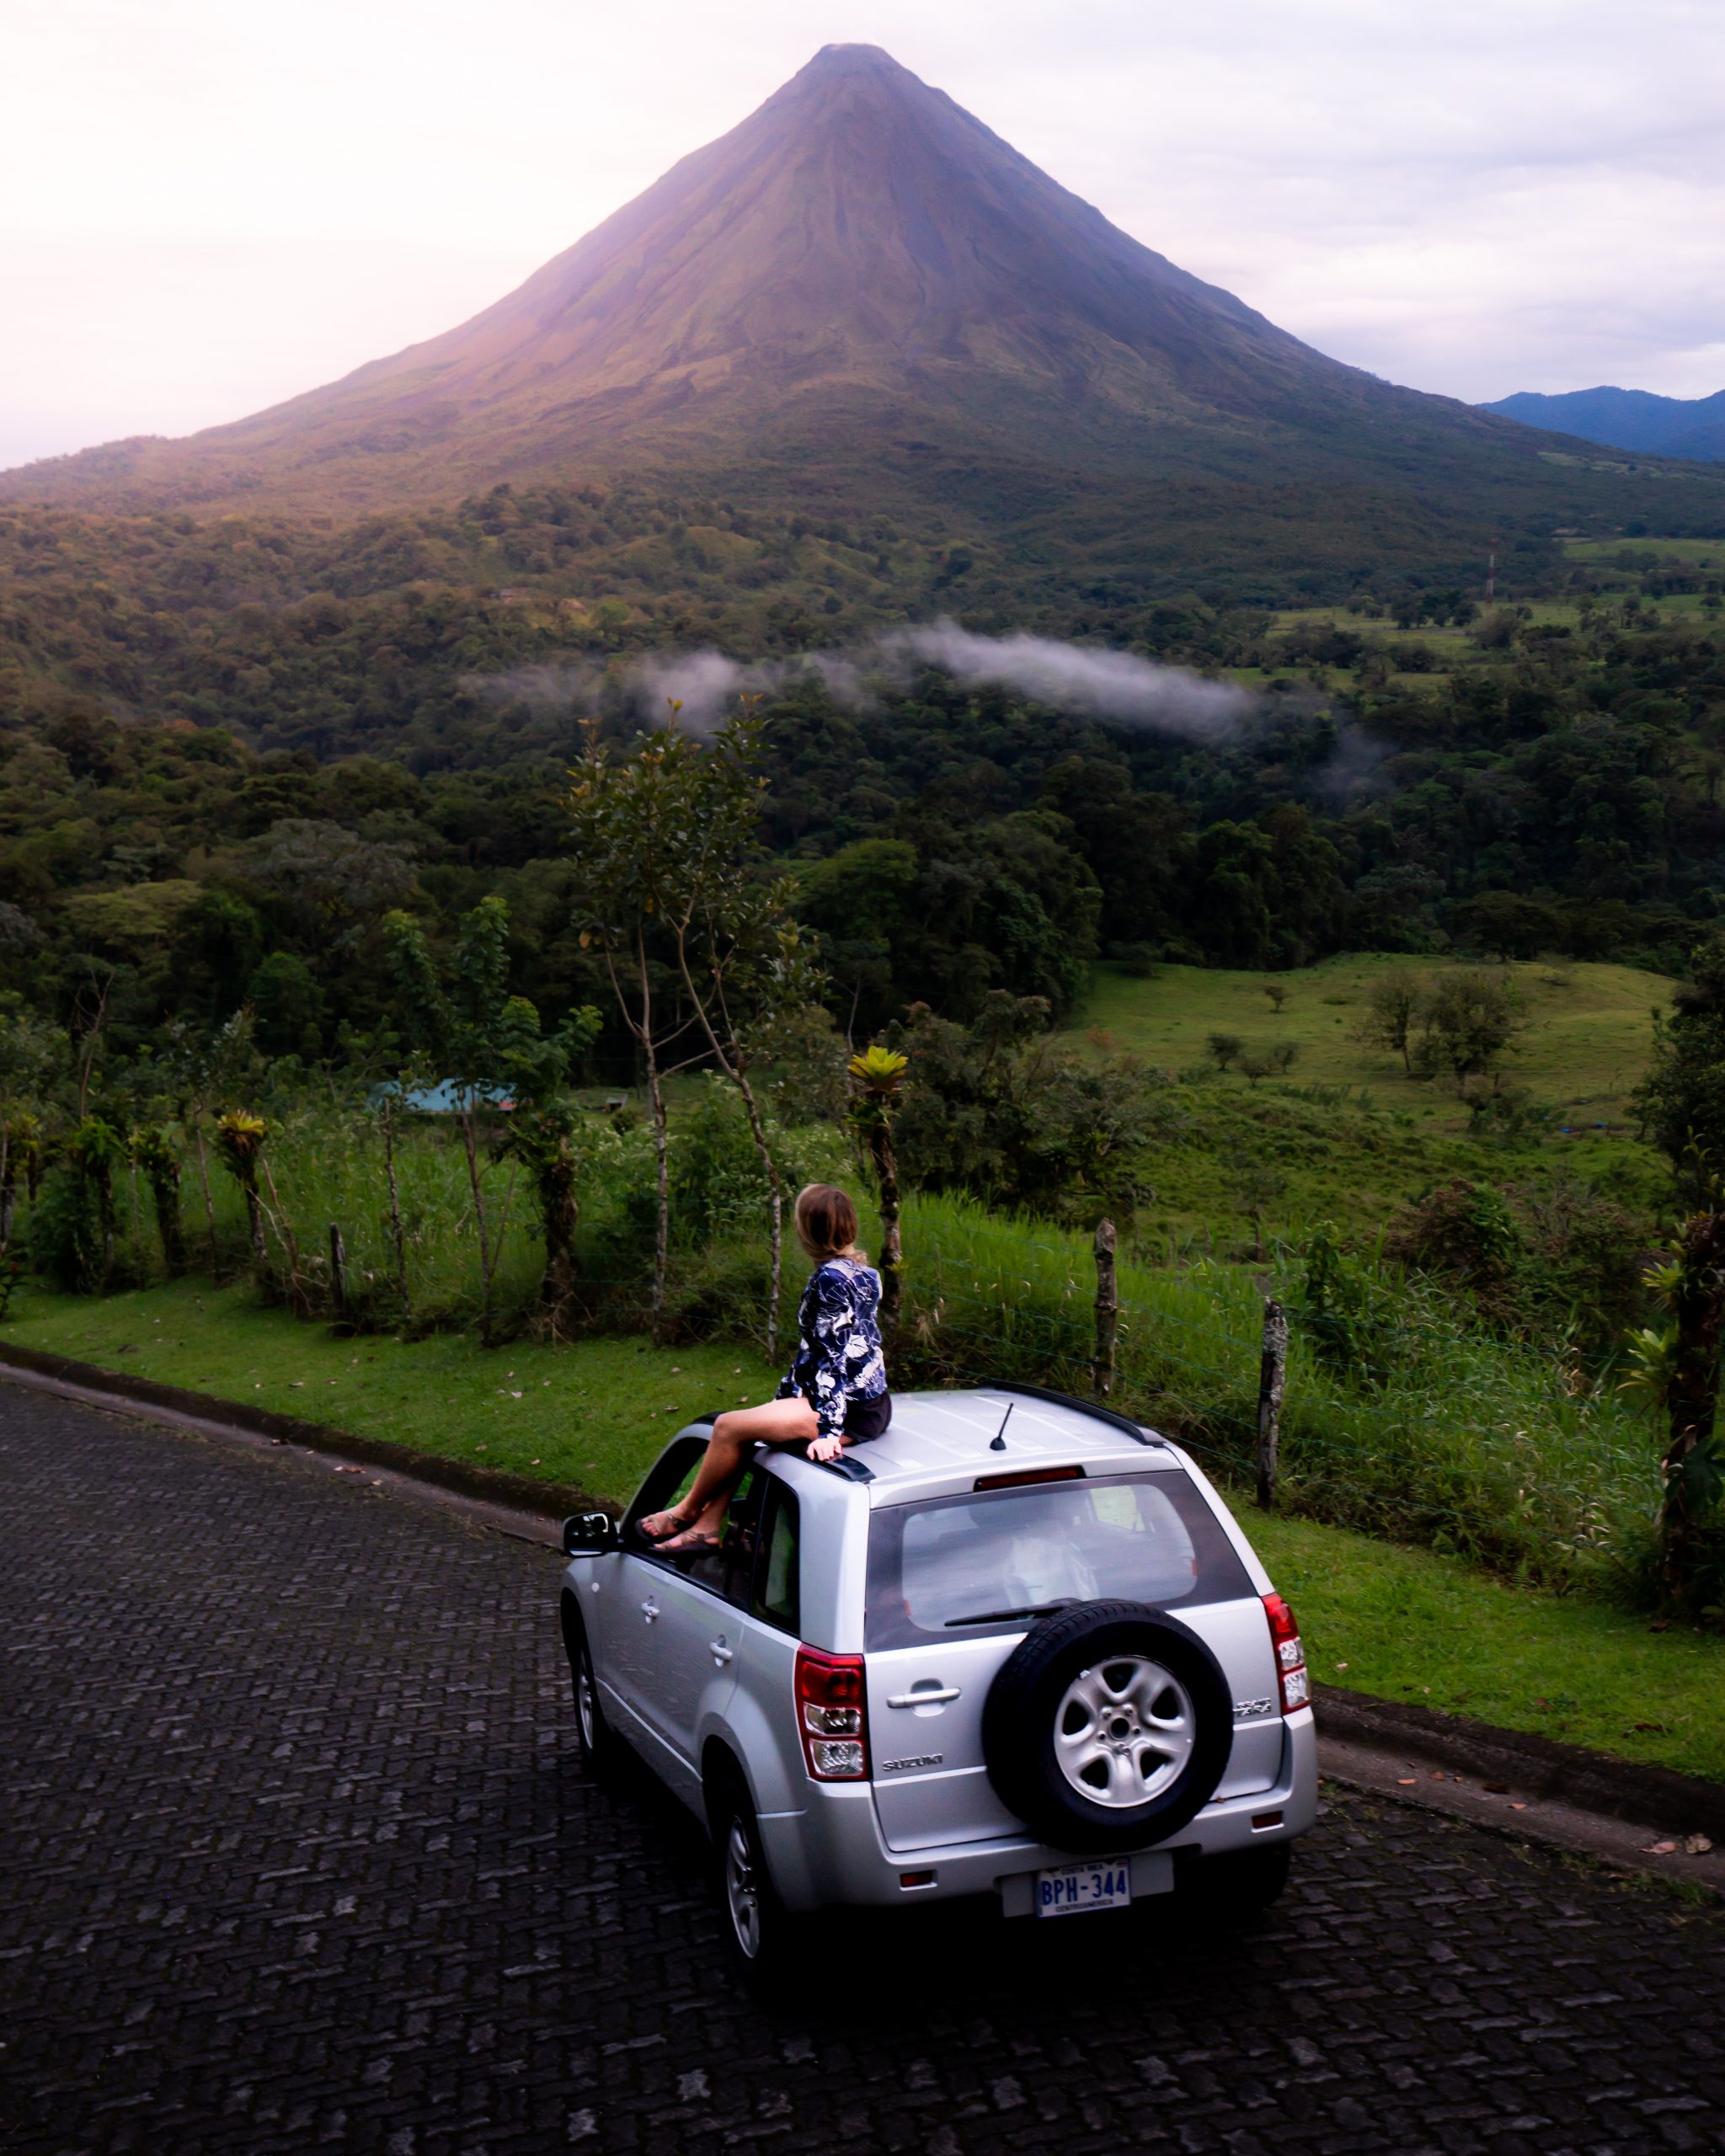 
How To Get From Puerto Viejo to La Fortuna - All Possible Ways, cheapest way from Puerto Viejo to La Fortuna, Puerto Viejo to La Fortuna, Puerto Viejo costa rica to La Fortuna, Puerto Viejo to La Fortuna bus, Puerto Viejo to La Fortuna costa rica, Quesada to La Fortuna, San Jose to Quesada, San Jose Costa Rica to Quesada